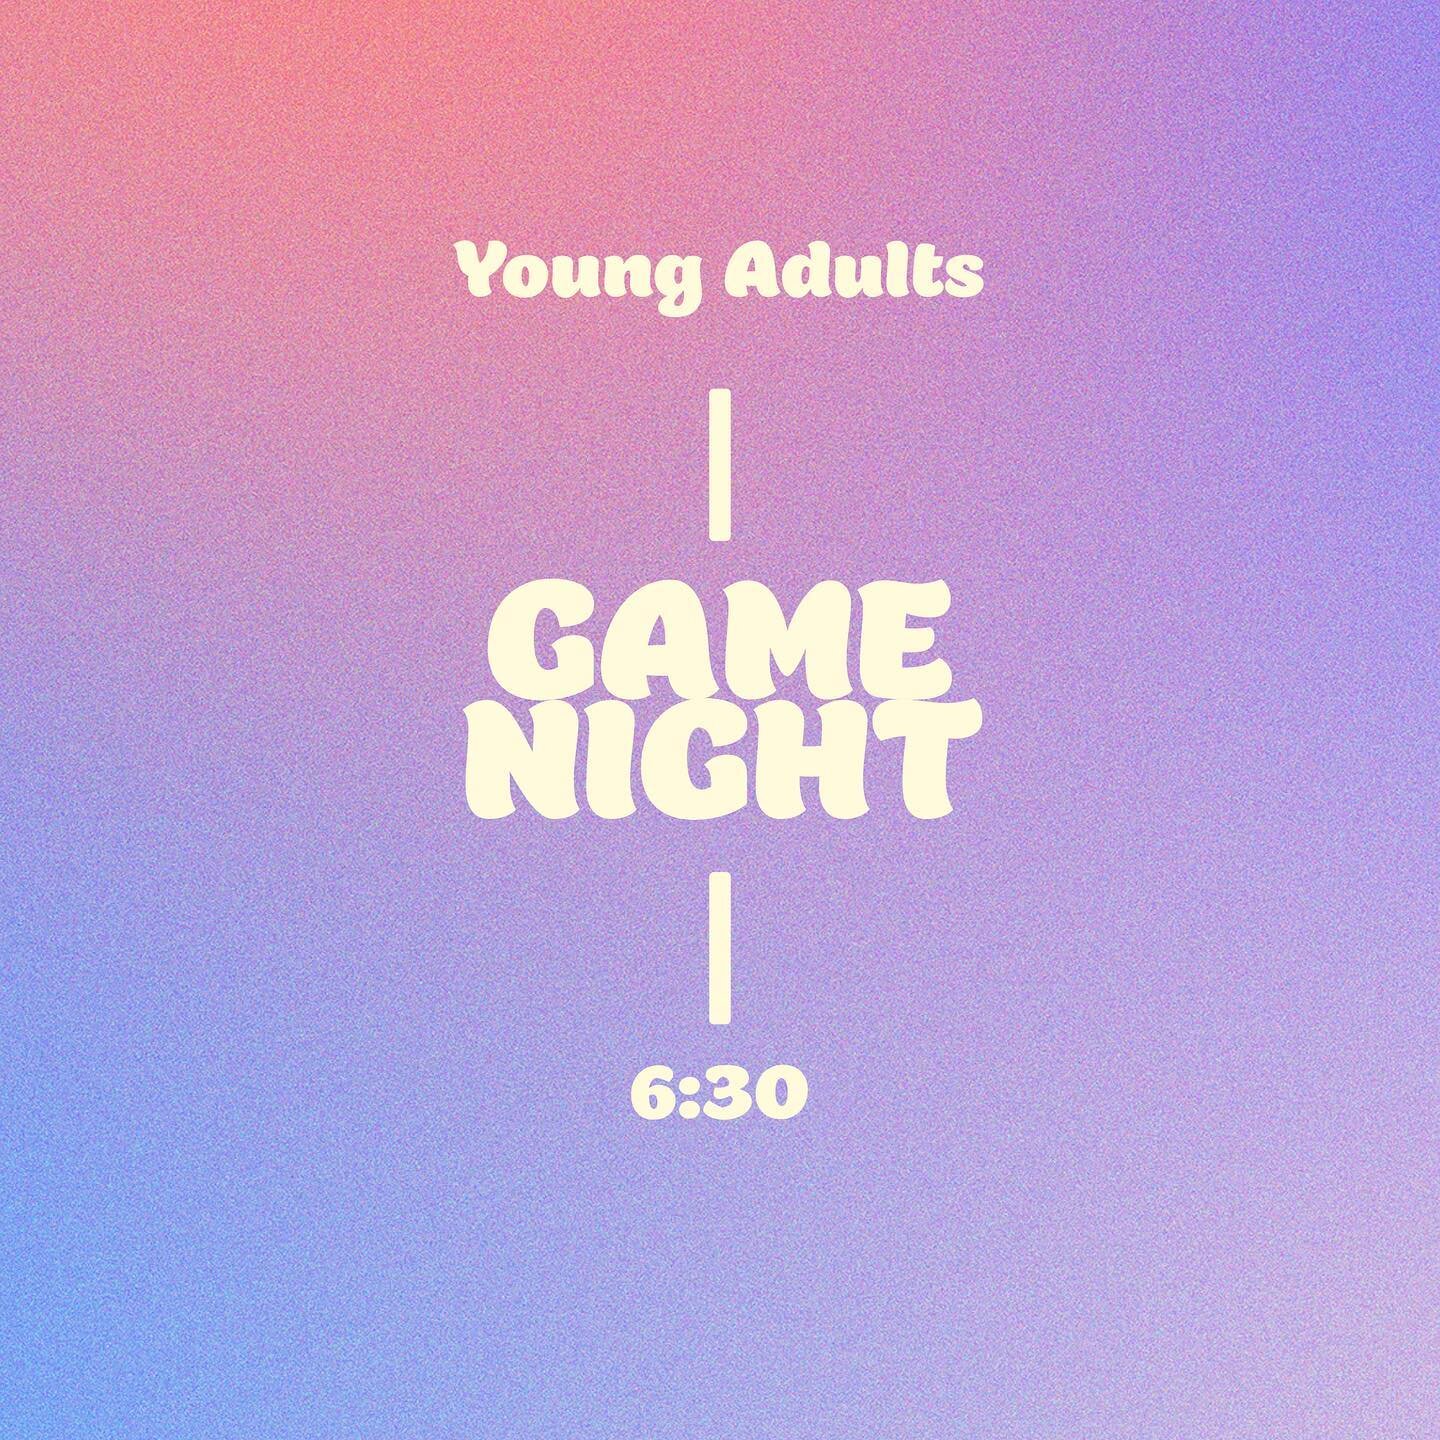 Hi guys, game night tonight! Who&rsquo;s coming? We will be meeting in the church cafe, invite a friend and we&rsquo;ll see you out here soon! 🎲 🙌🏼